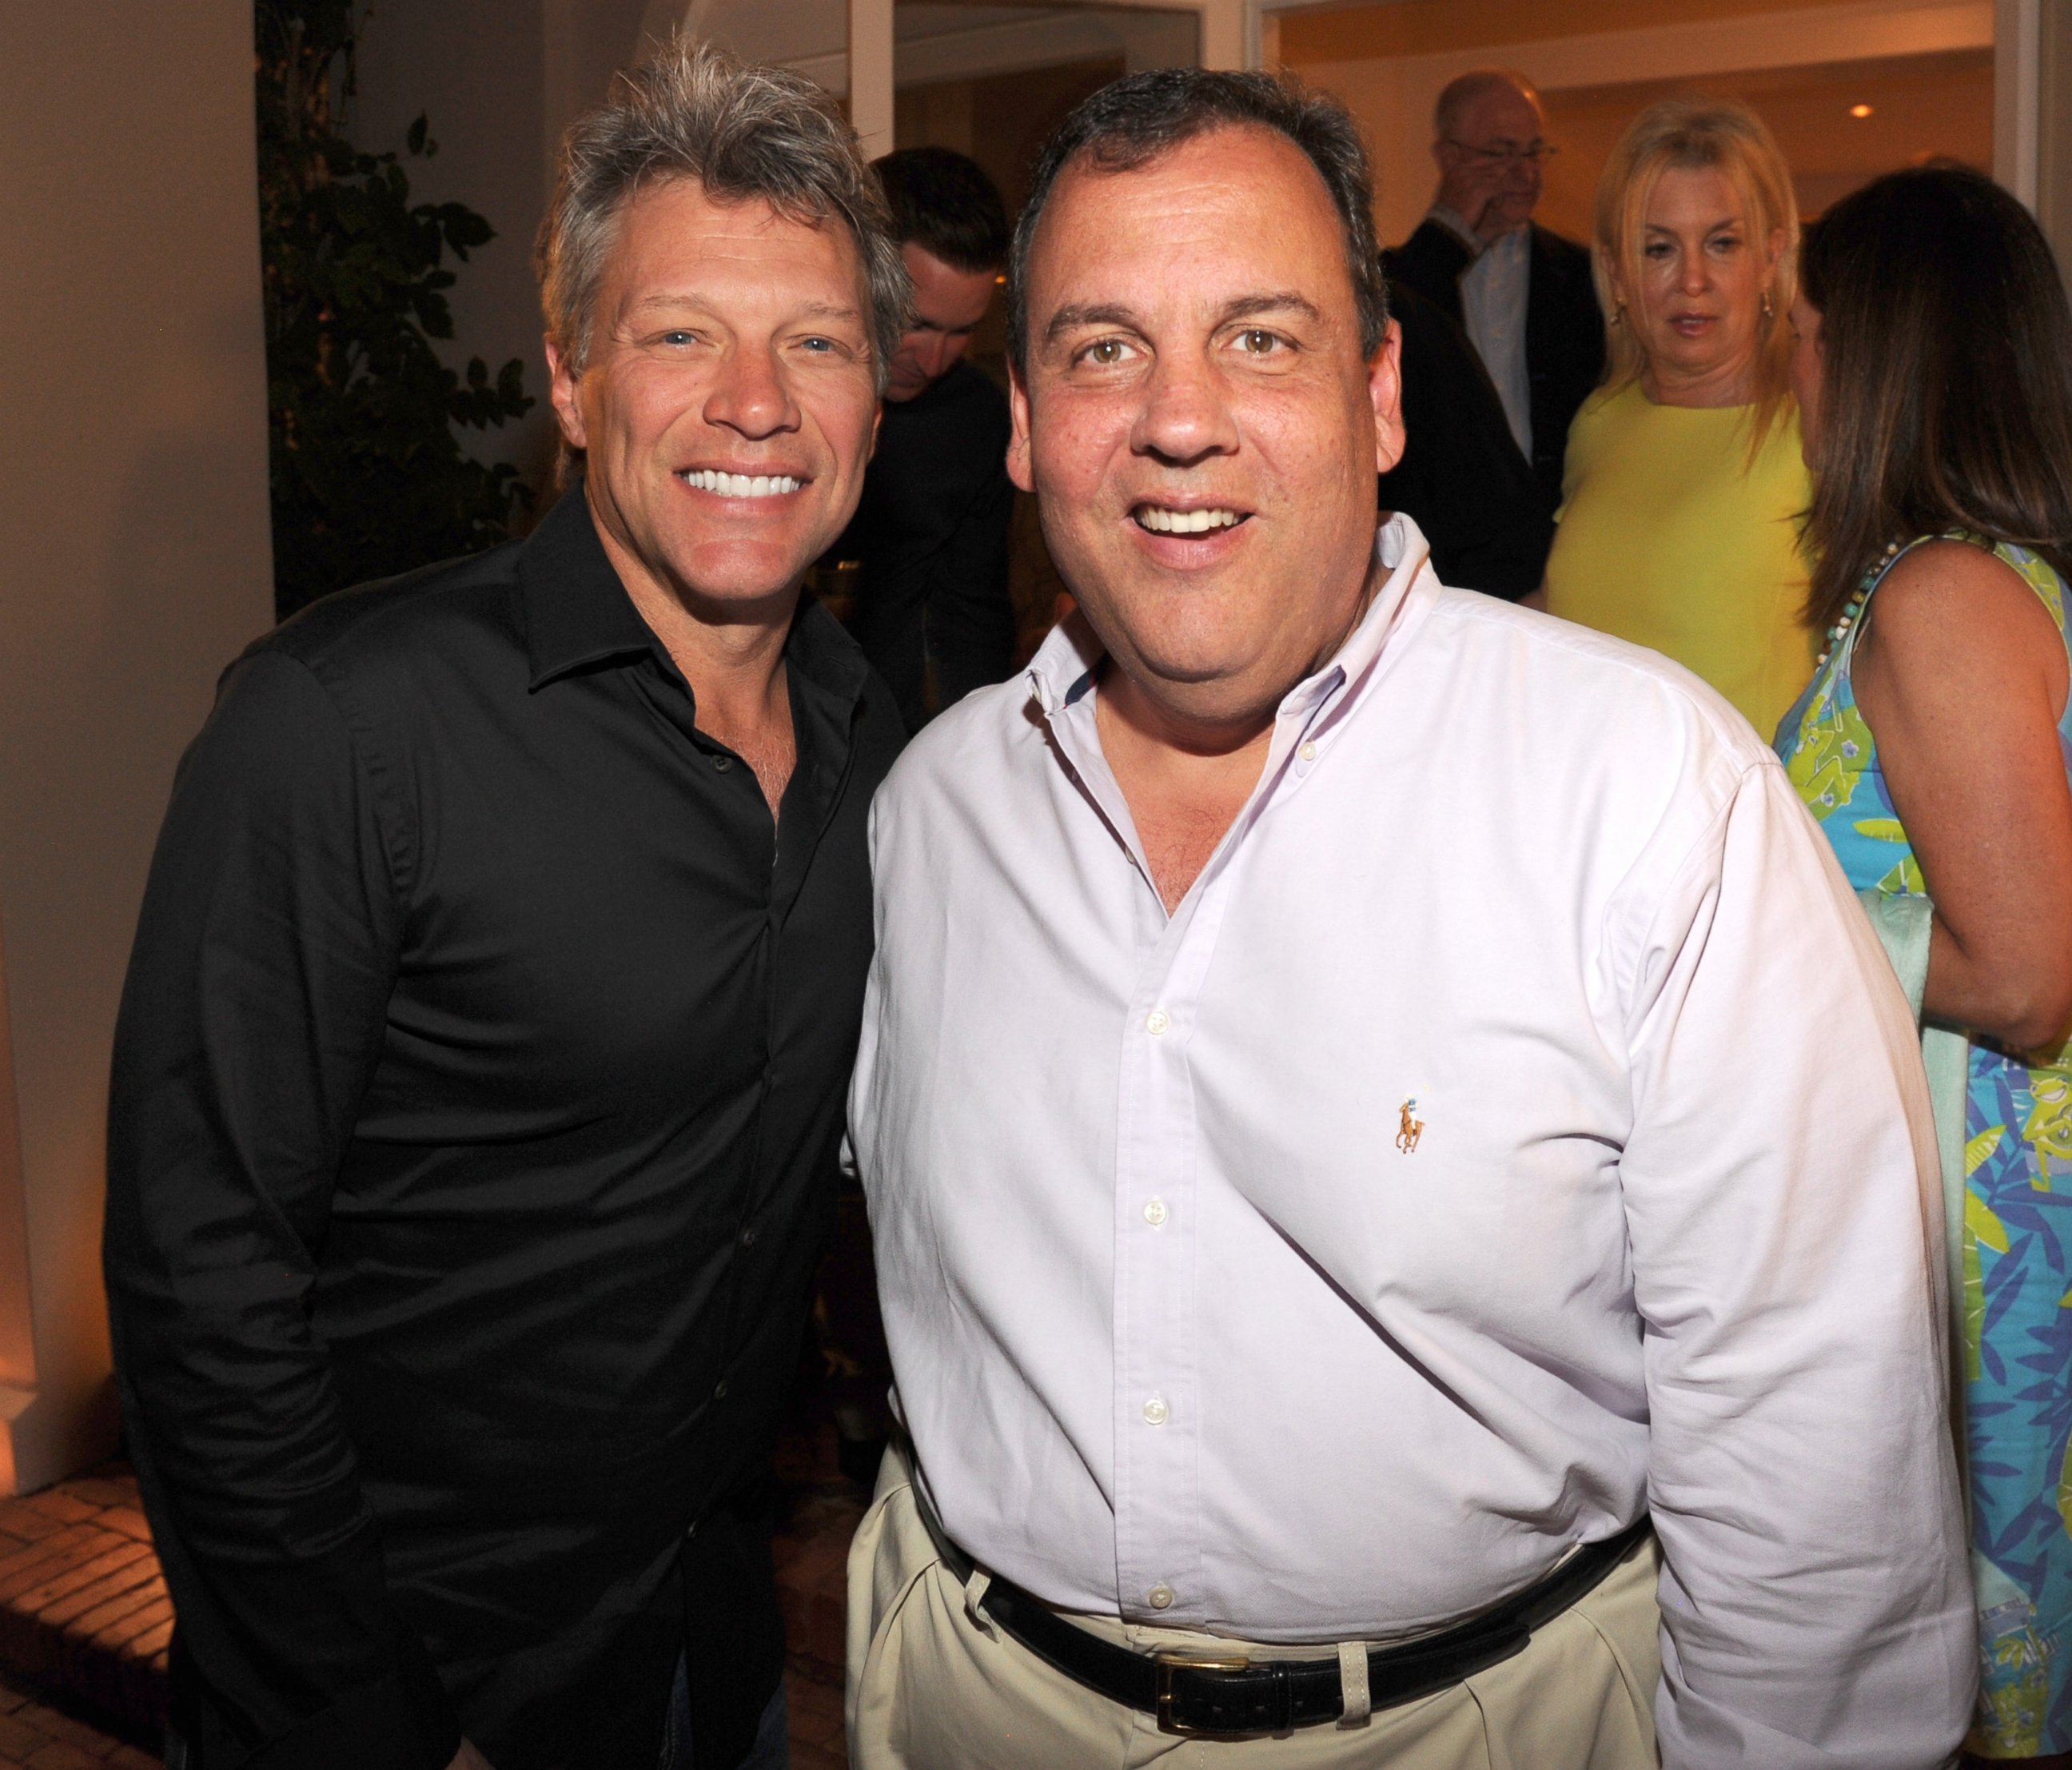 PHOTO: Jon Bon Jovi and New Jersey Governor Chris Christie attend an event on Aug. 16, 2014, in East Hampton, N.Y.